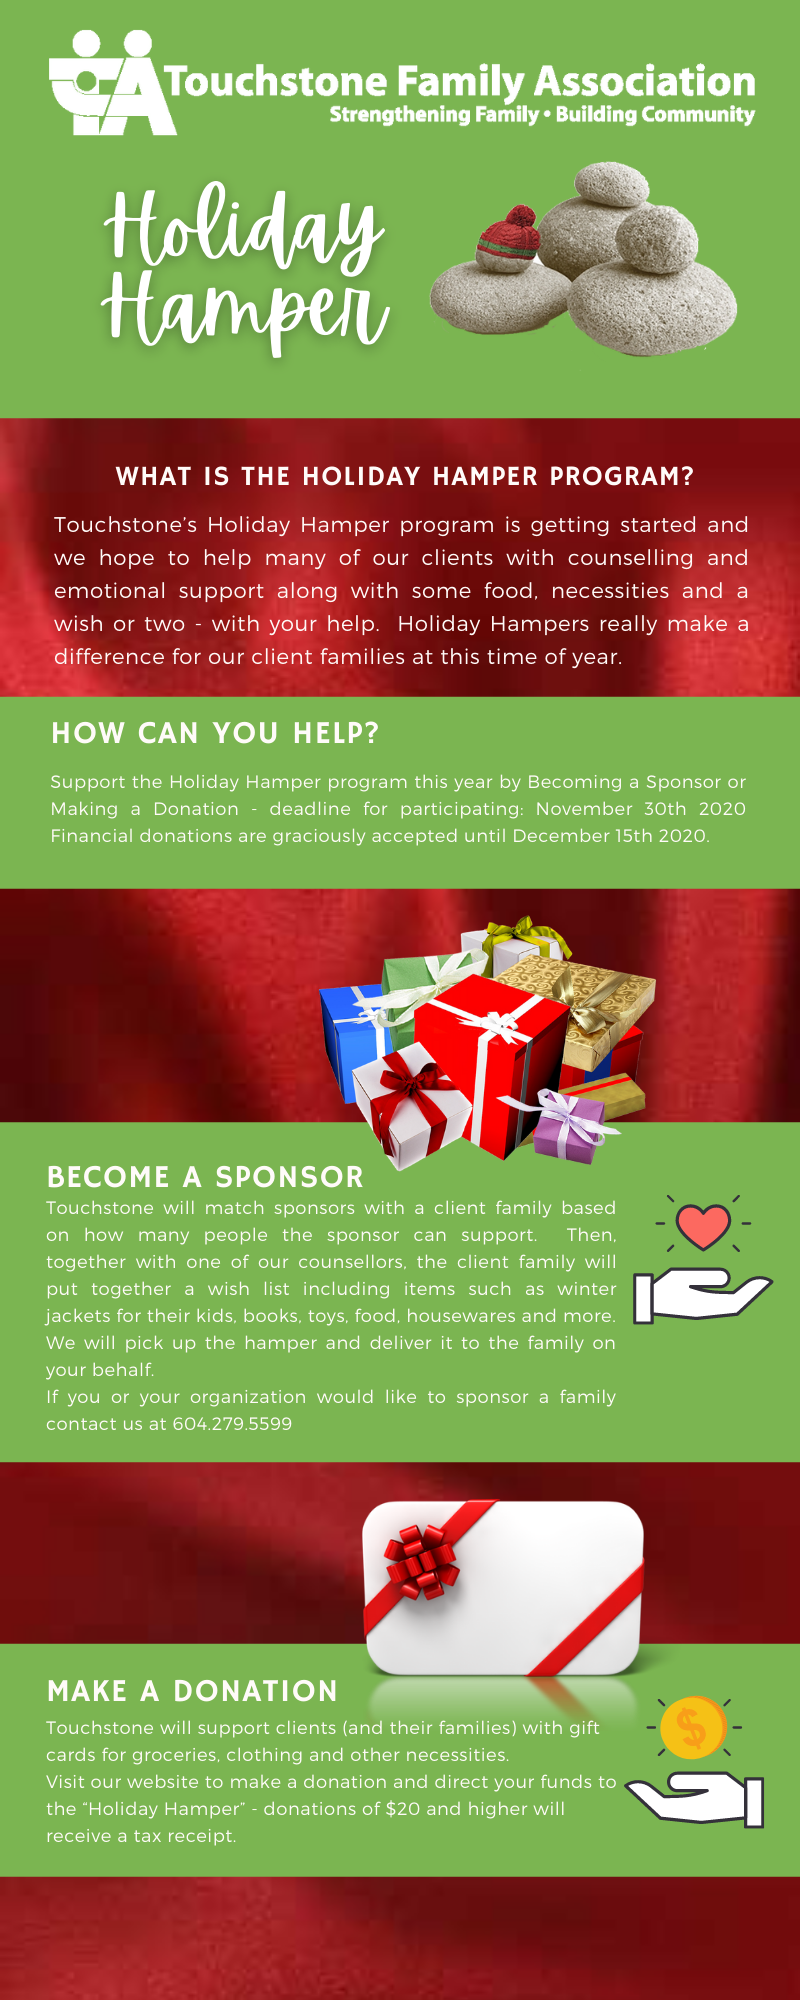 Holiday Hamper Infographic